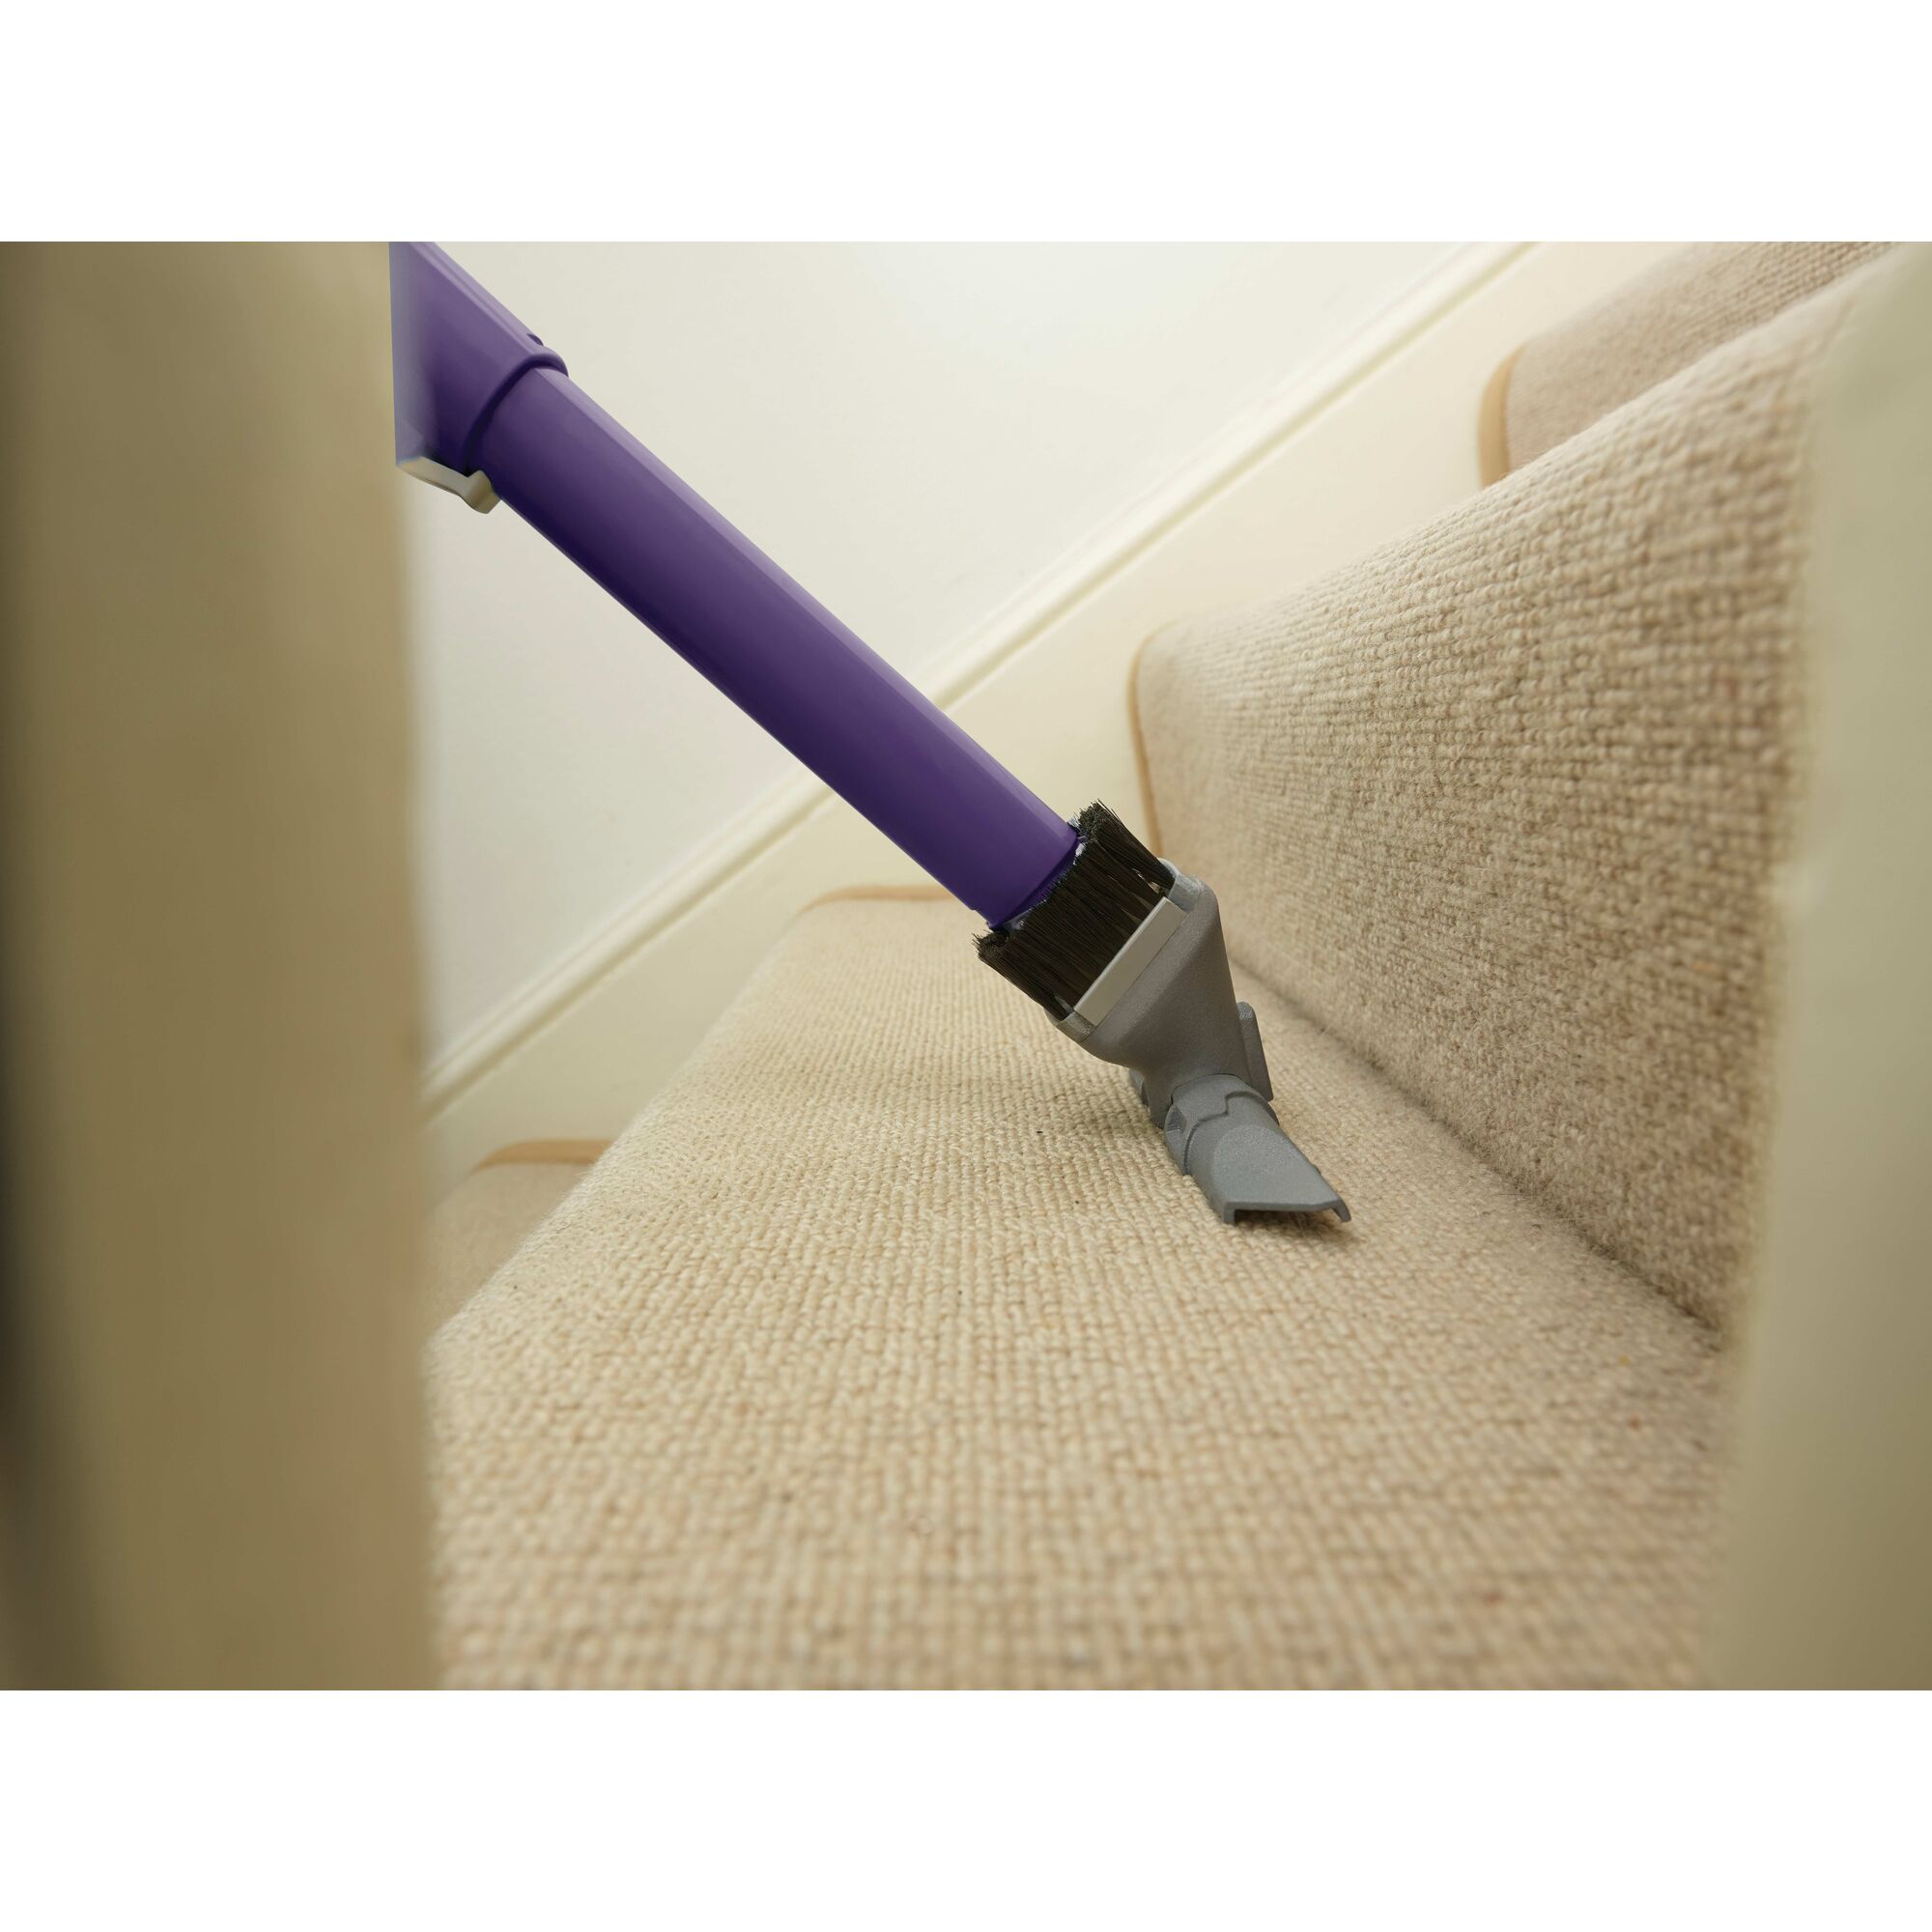 POWER SERIES PRO Cordless 2 in 1 Pet Vacuum being used to clean carpet on stairs.